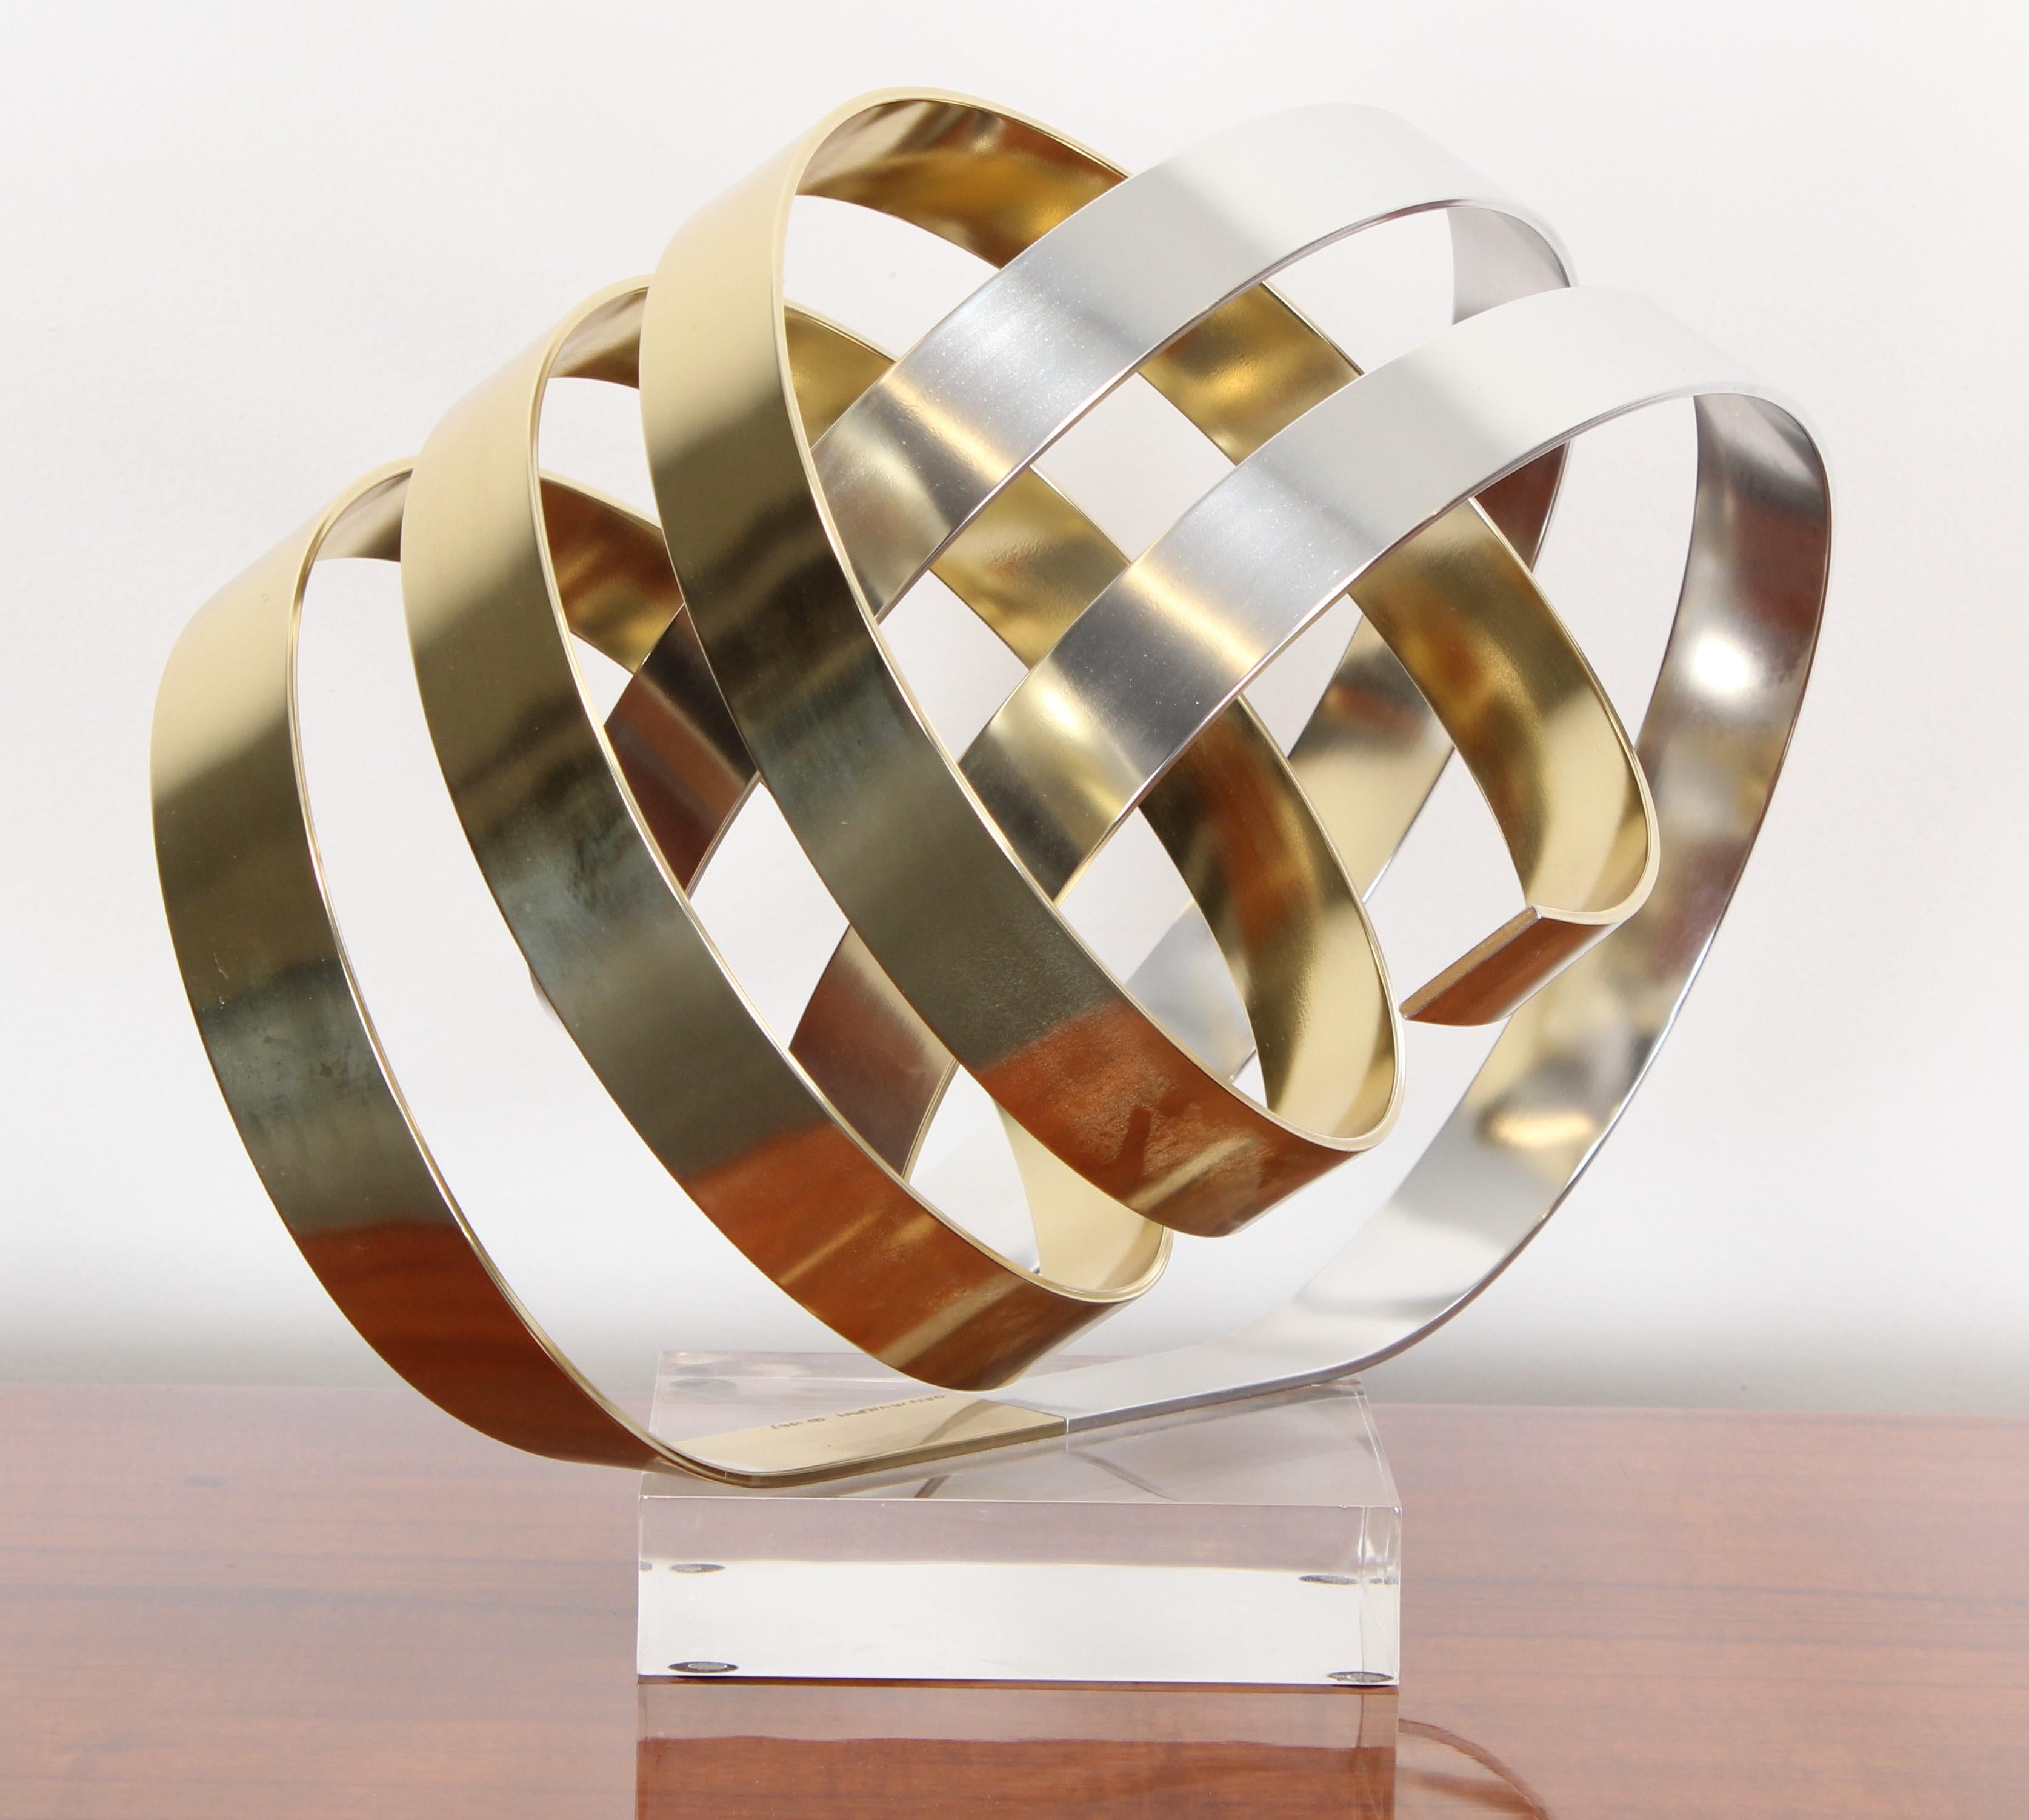 A Dan Murphy ribbon sculpture made of gold and silver aluminum on an acrylic base. Signed and dated 1983.

Dimensions: 13.25